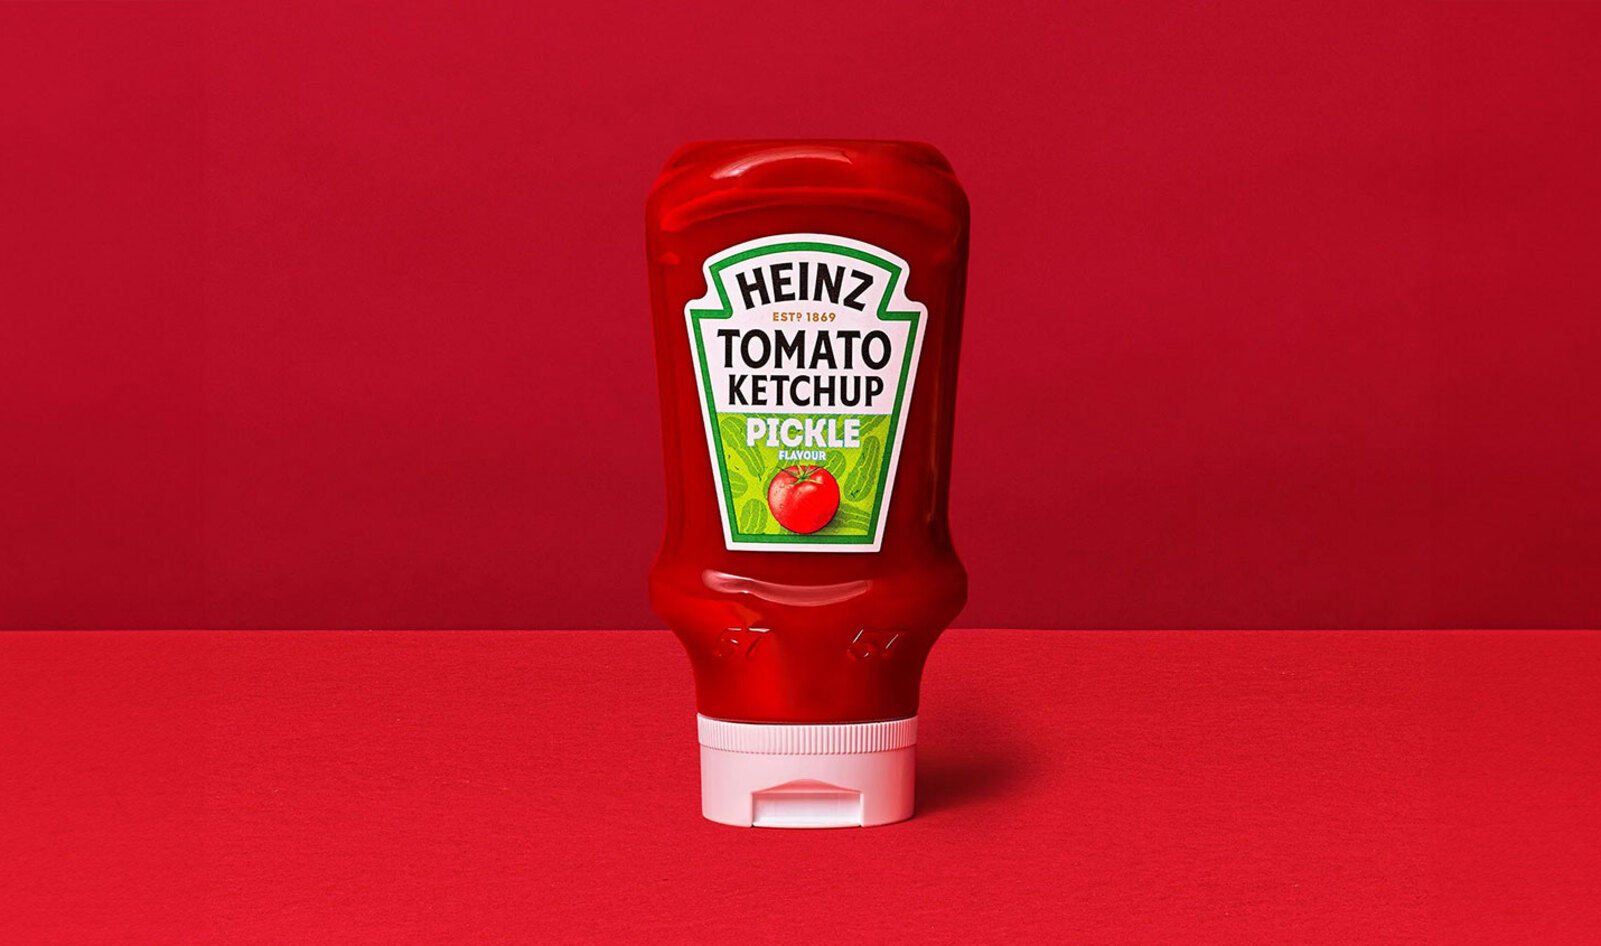 Vegan Food News of the Week: Heinz Pickle Ketchup, Beyond Pepperoni Pizza, and More